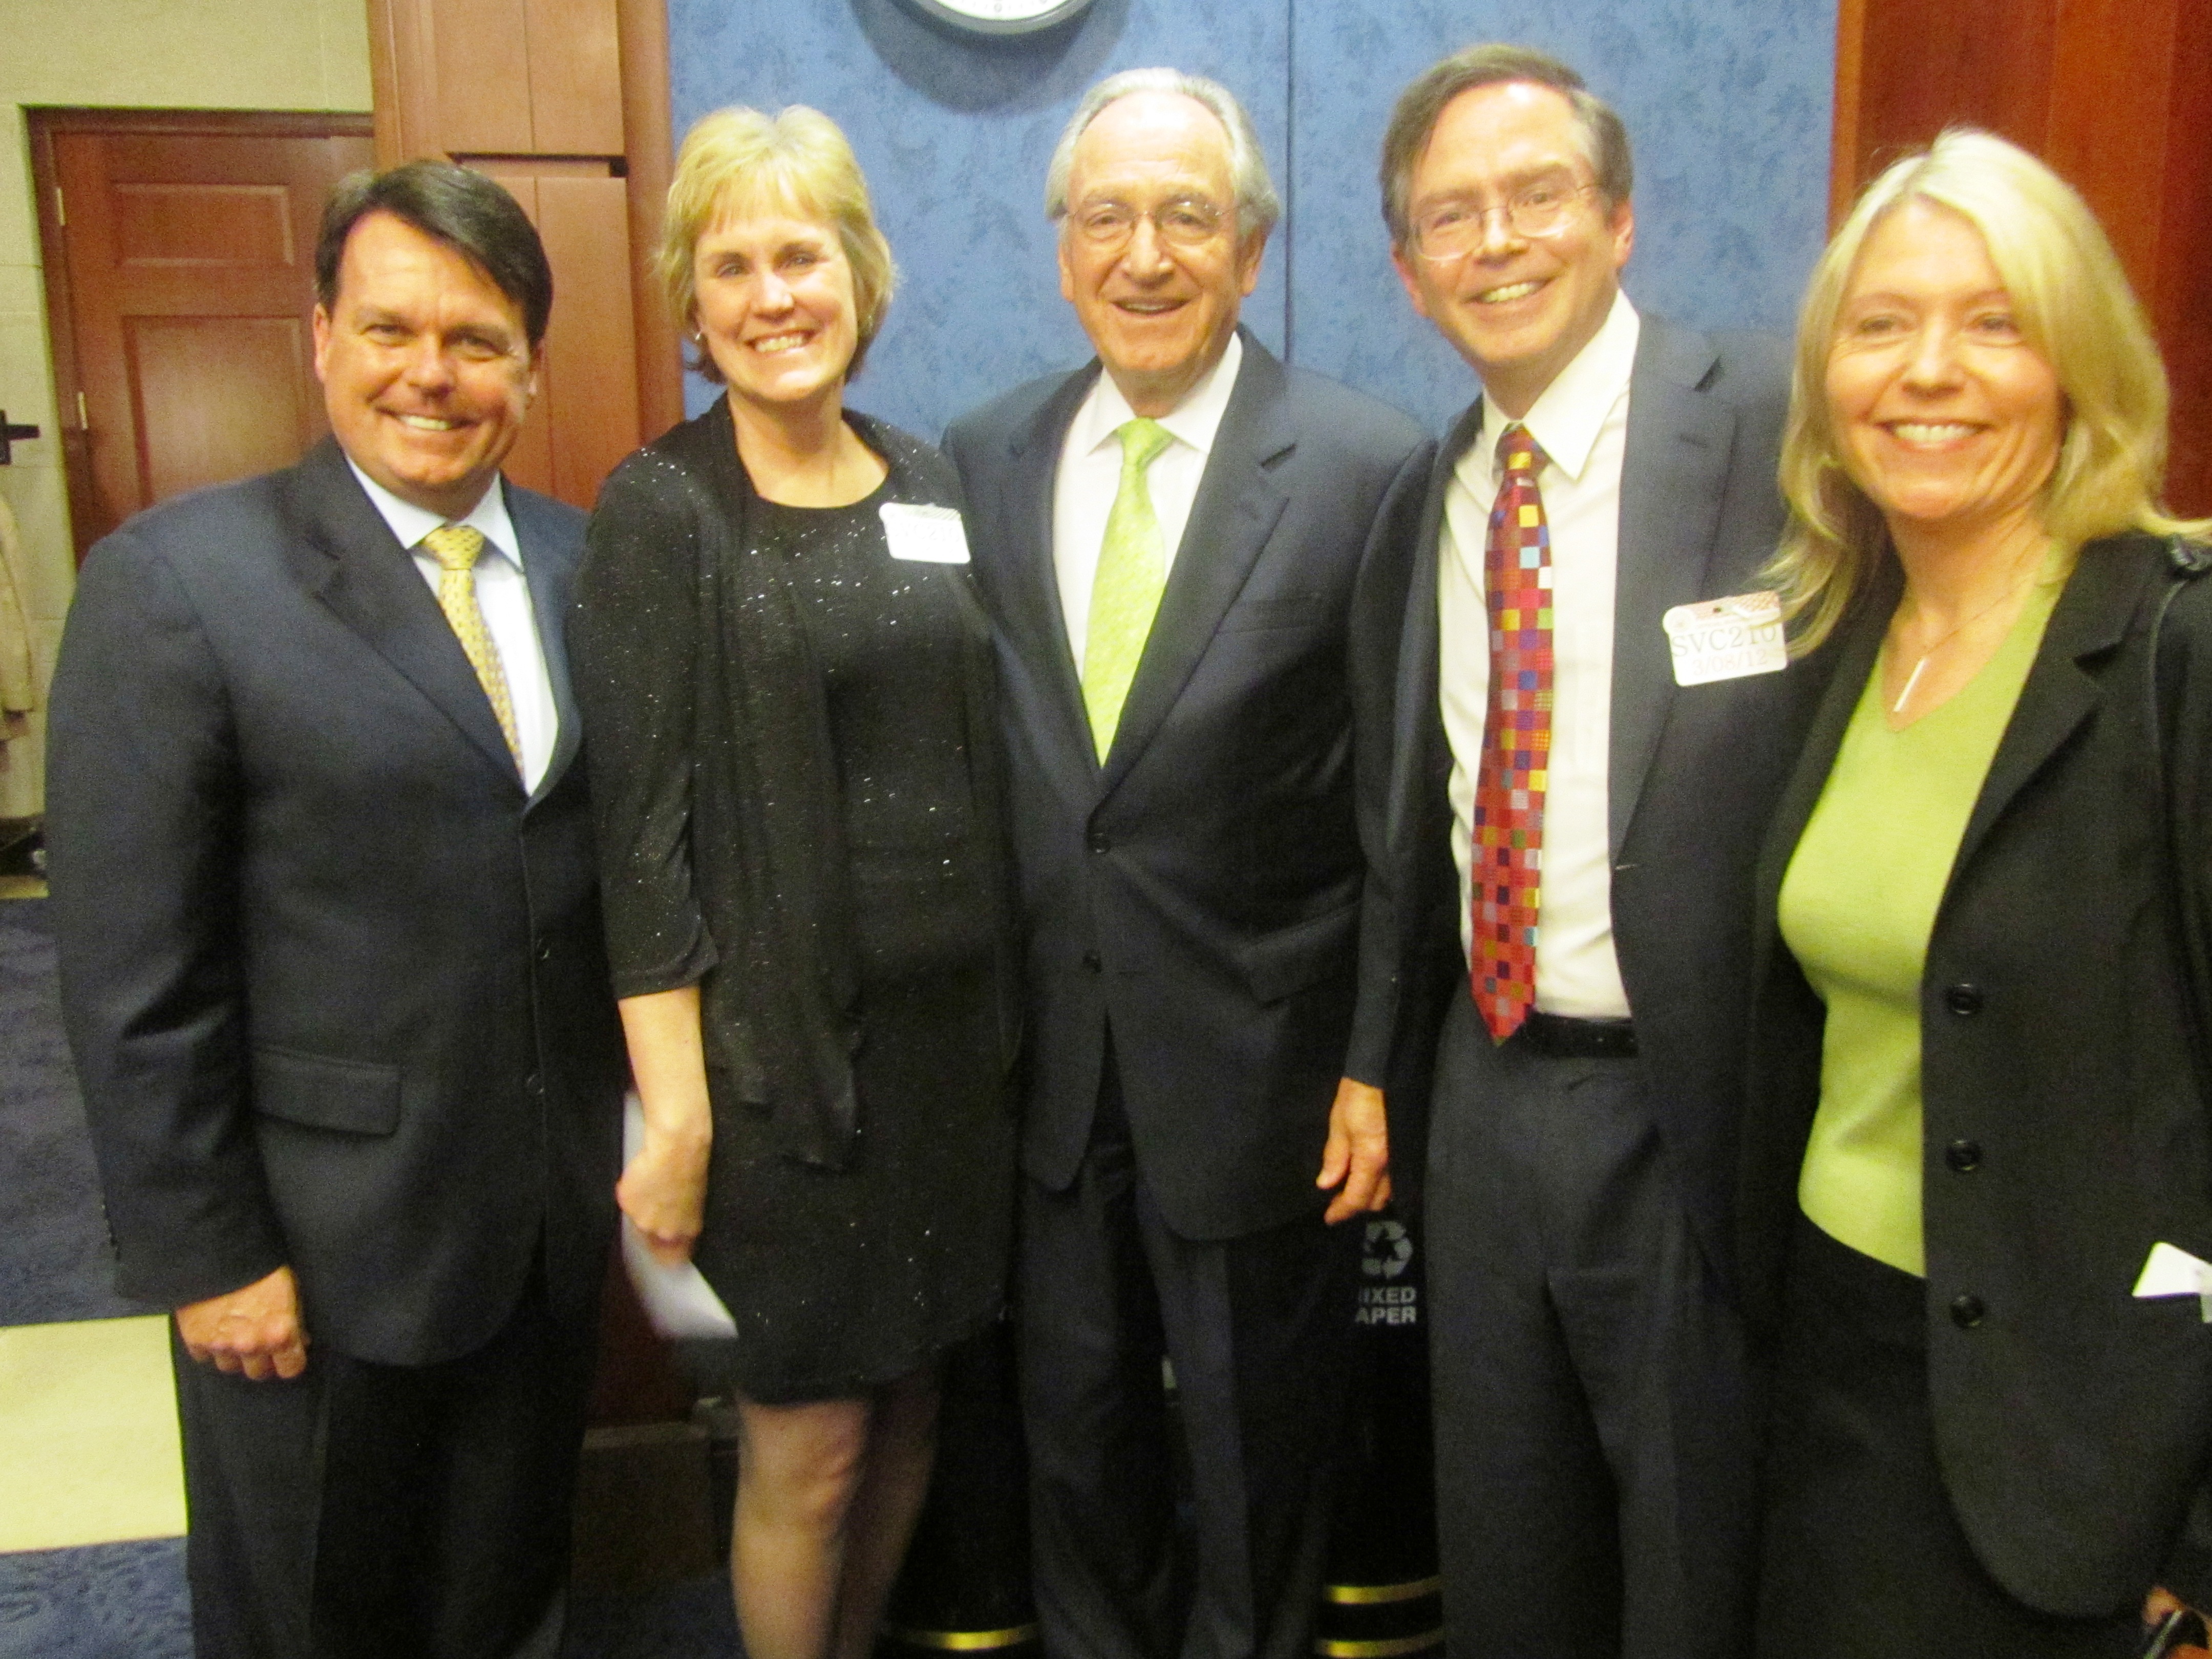 Five individuals standing with Senator Tom Harkin in the middle flanked on his left by Tom Sheridan, Julie Freed, and on his right by Jim Fruchterman and Betsy Beaumon, standing, all in dark suits, 